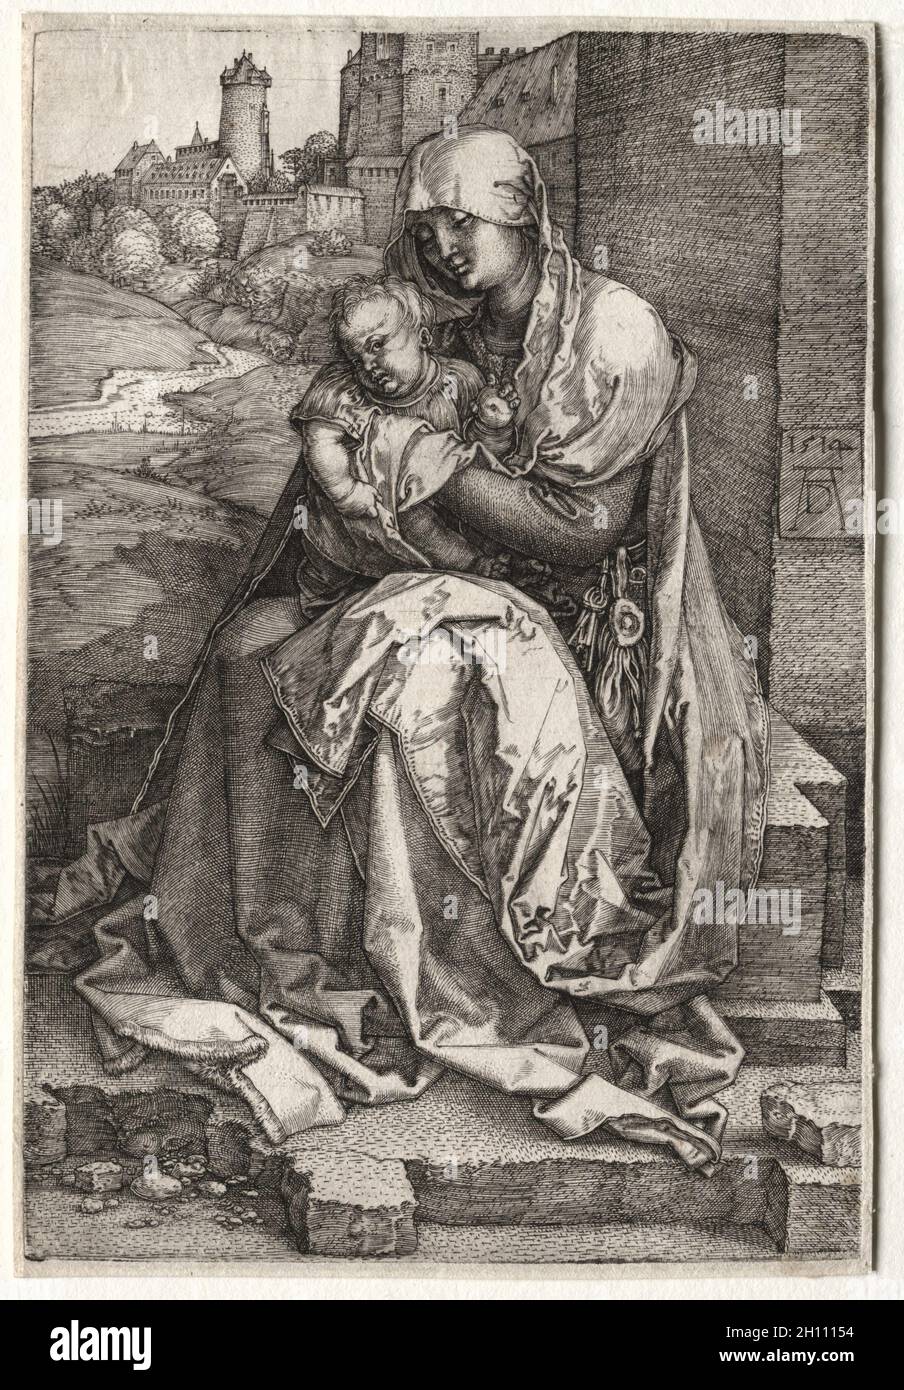 The Virgin and Child Seated by the Wall, 1514. Albrecht Dürer (German, 1471-1528). Engraving; platemark: 14.7 x 9.9 cm (5 13/16 x 3 7/8 in.); paper: 15 x 10.2 cm (5 7/8 x 4 in.). Stock Photo